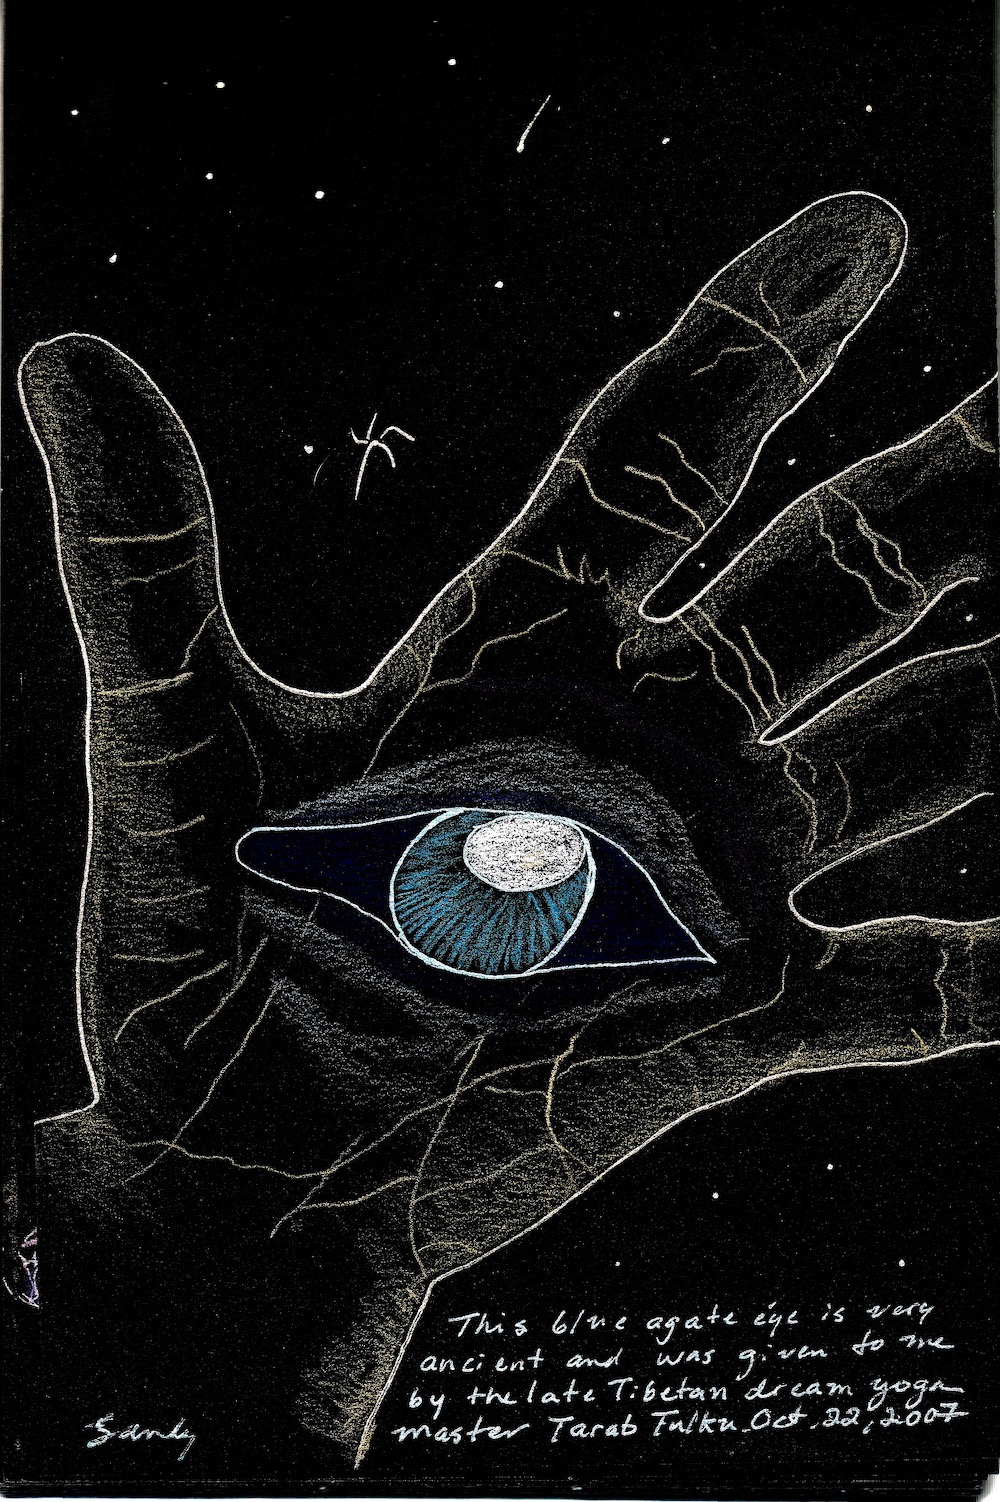 This is a drawing of my hand, white on black paper. It has a blue eye in the palm, and the caption says, "This blue agate eye is very ancient and was given to me by the late Tibetan dream yoga master Tarab Tulku. Oct. 22, 2007."